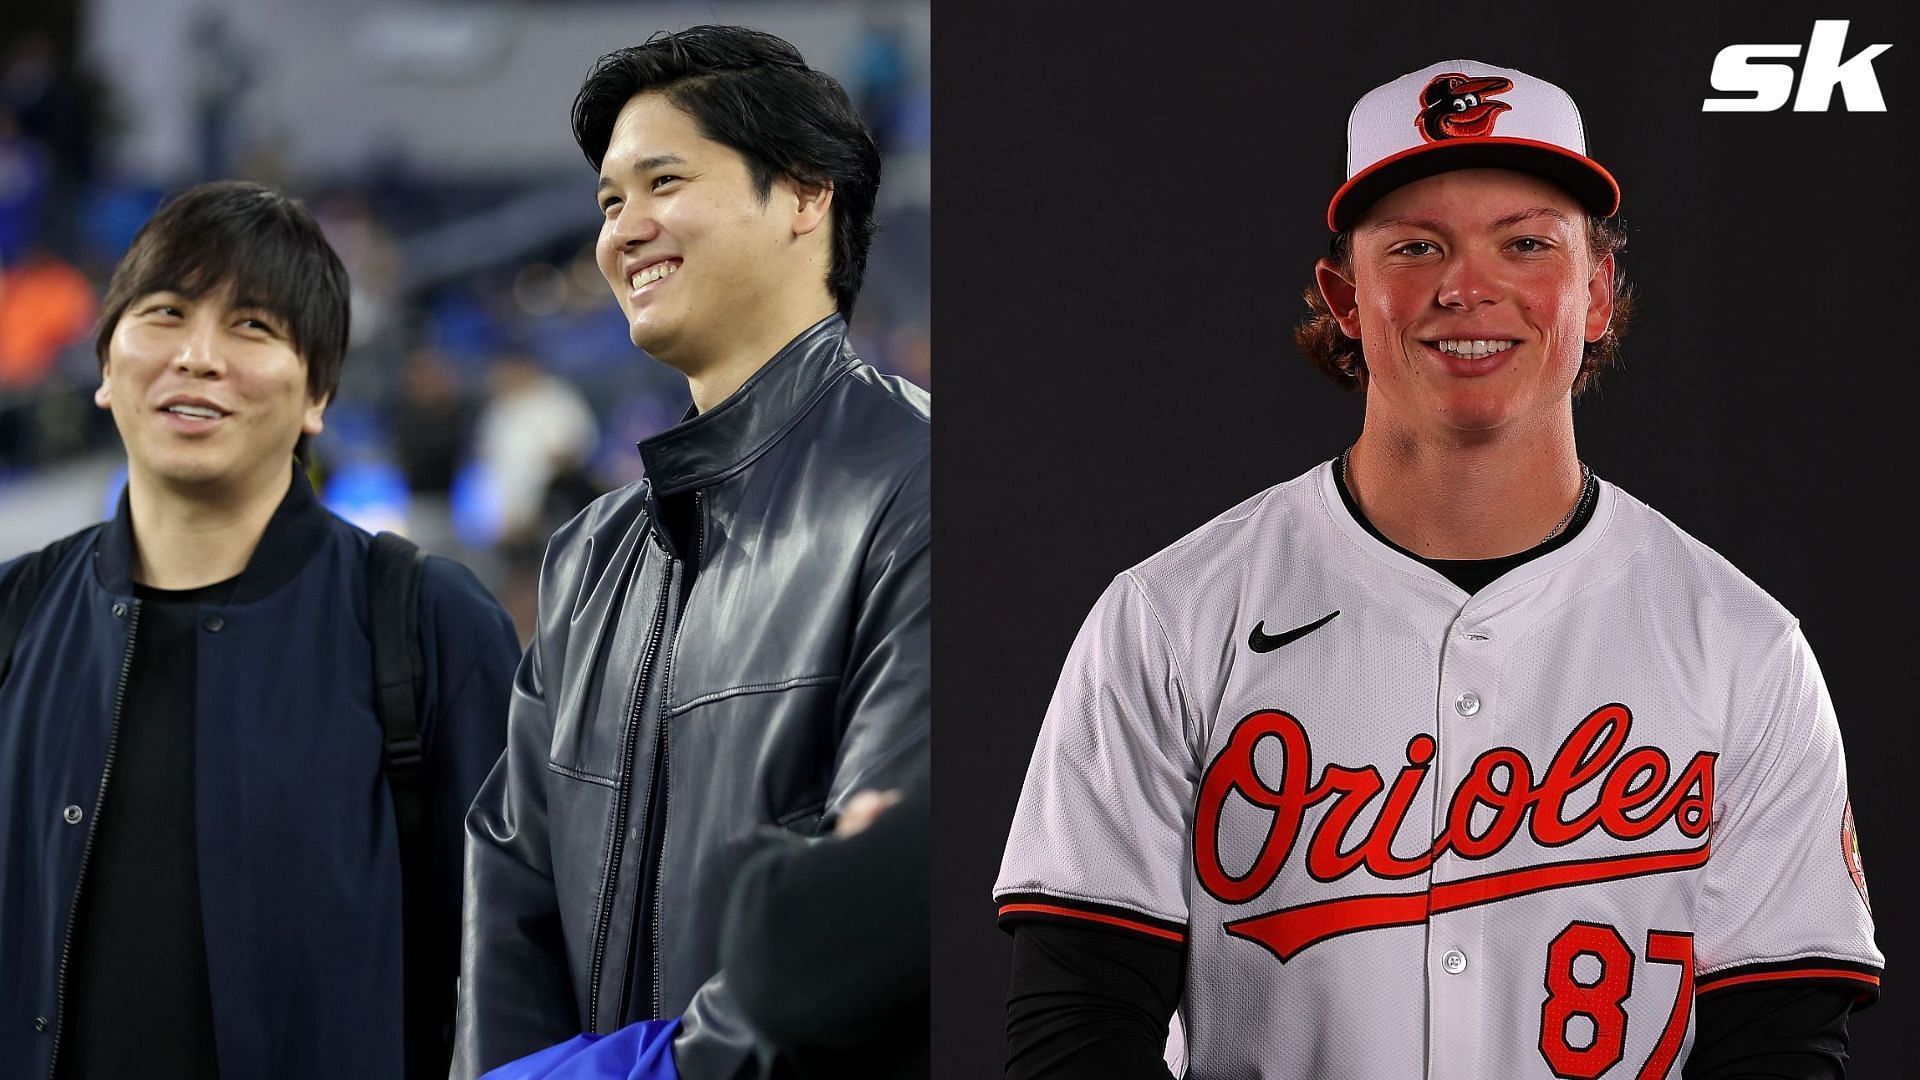 MLB News Today: Shohei Ohtani and Ippei Mizuhara officially under investigation, Jackson Holliday demoted to minor league camp